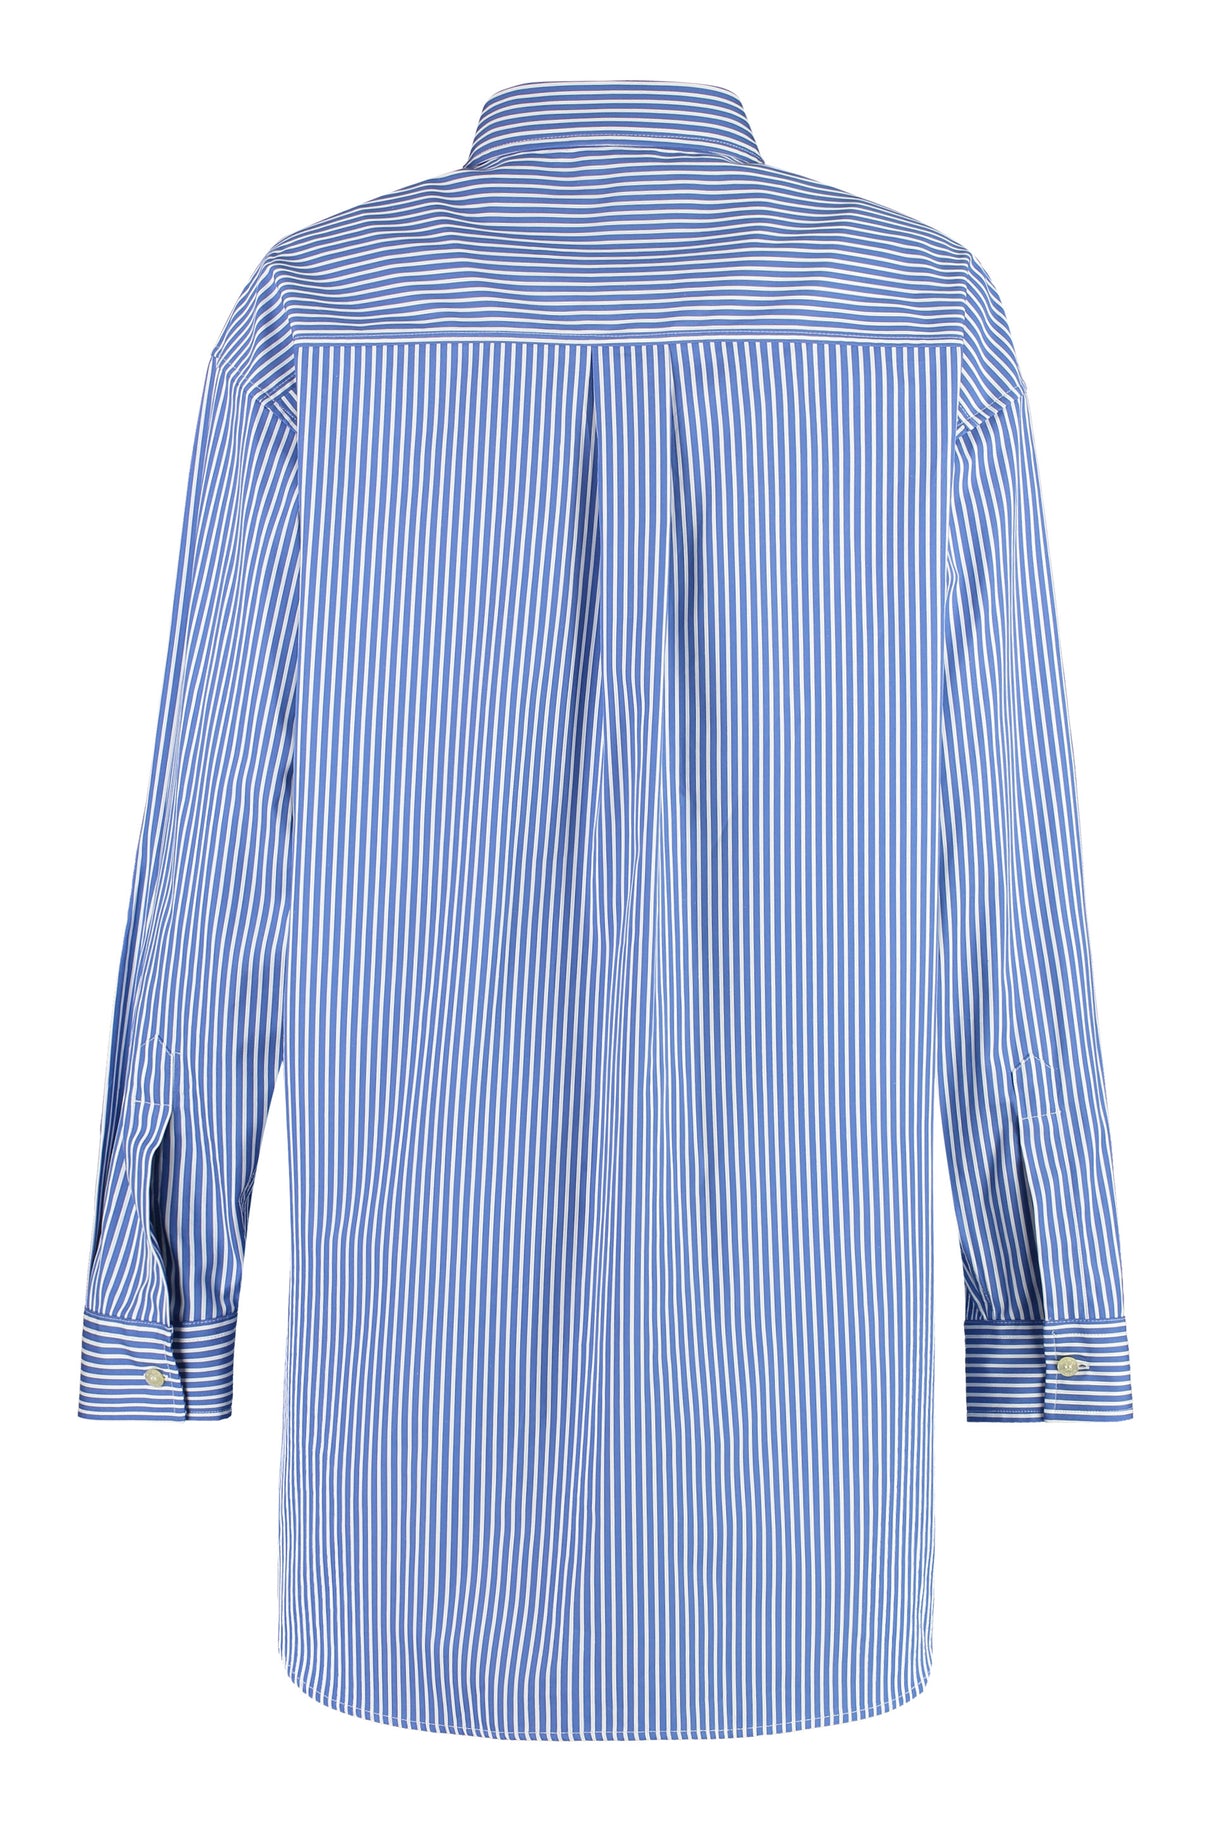 ETRO Blue Striped Cotton Shirt for Women - FW23 Collection